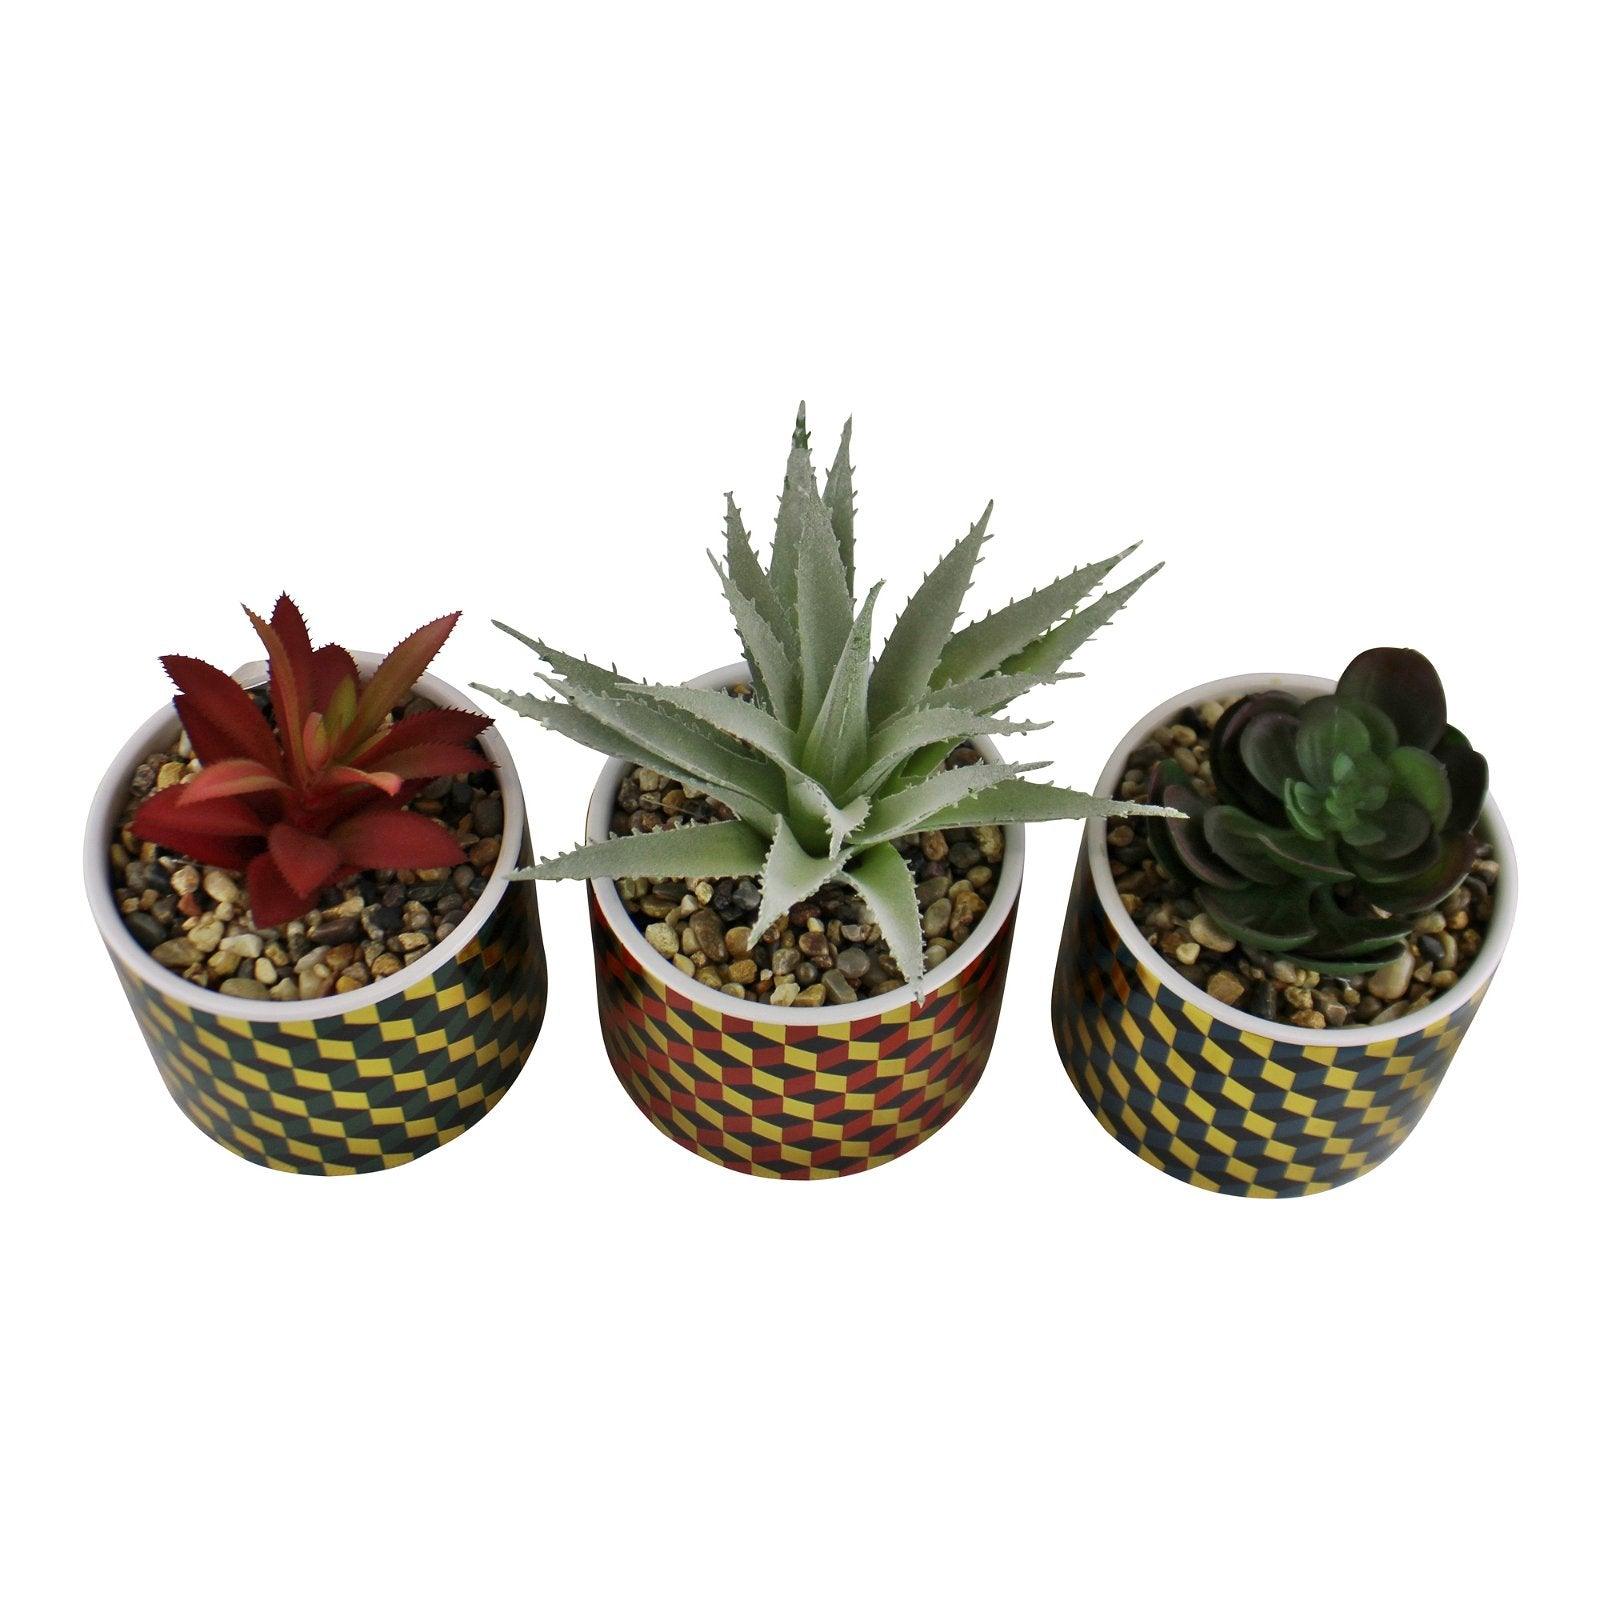 View Set of 3 Succulents In Ceramic Pots With A Cubic Design information